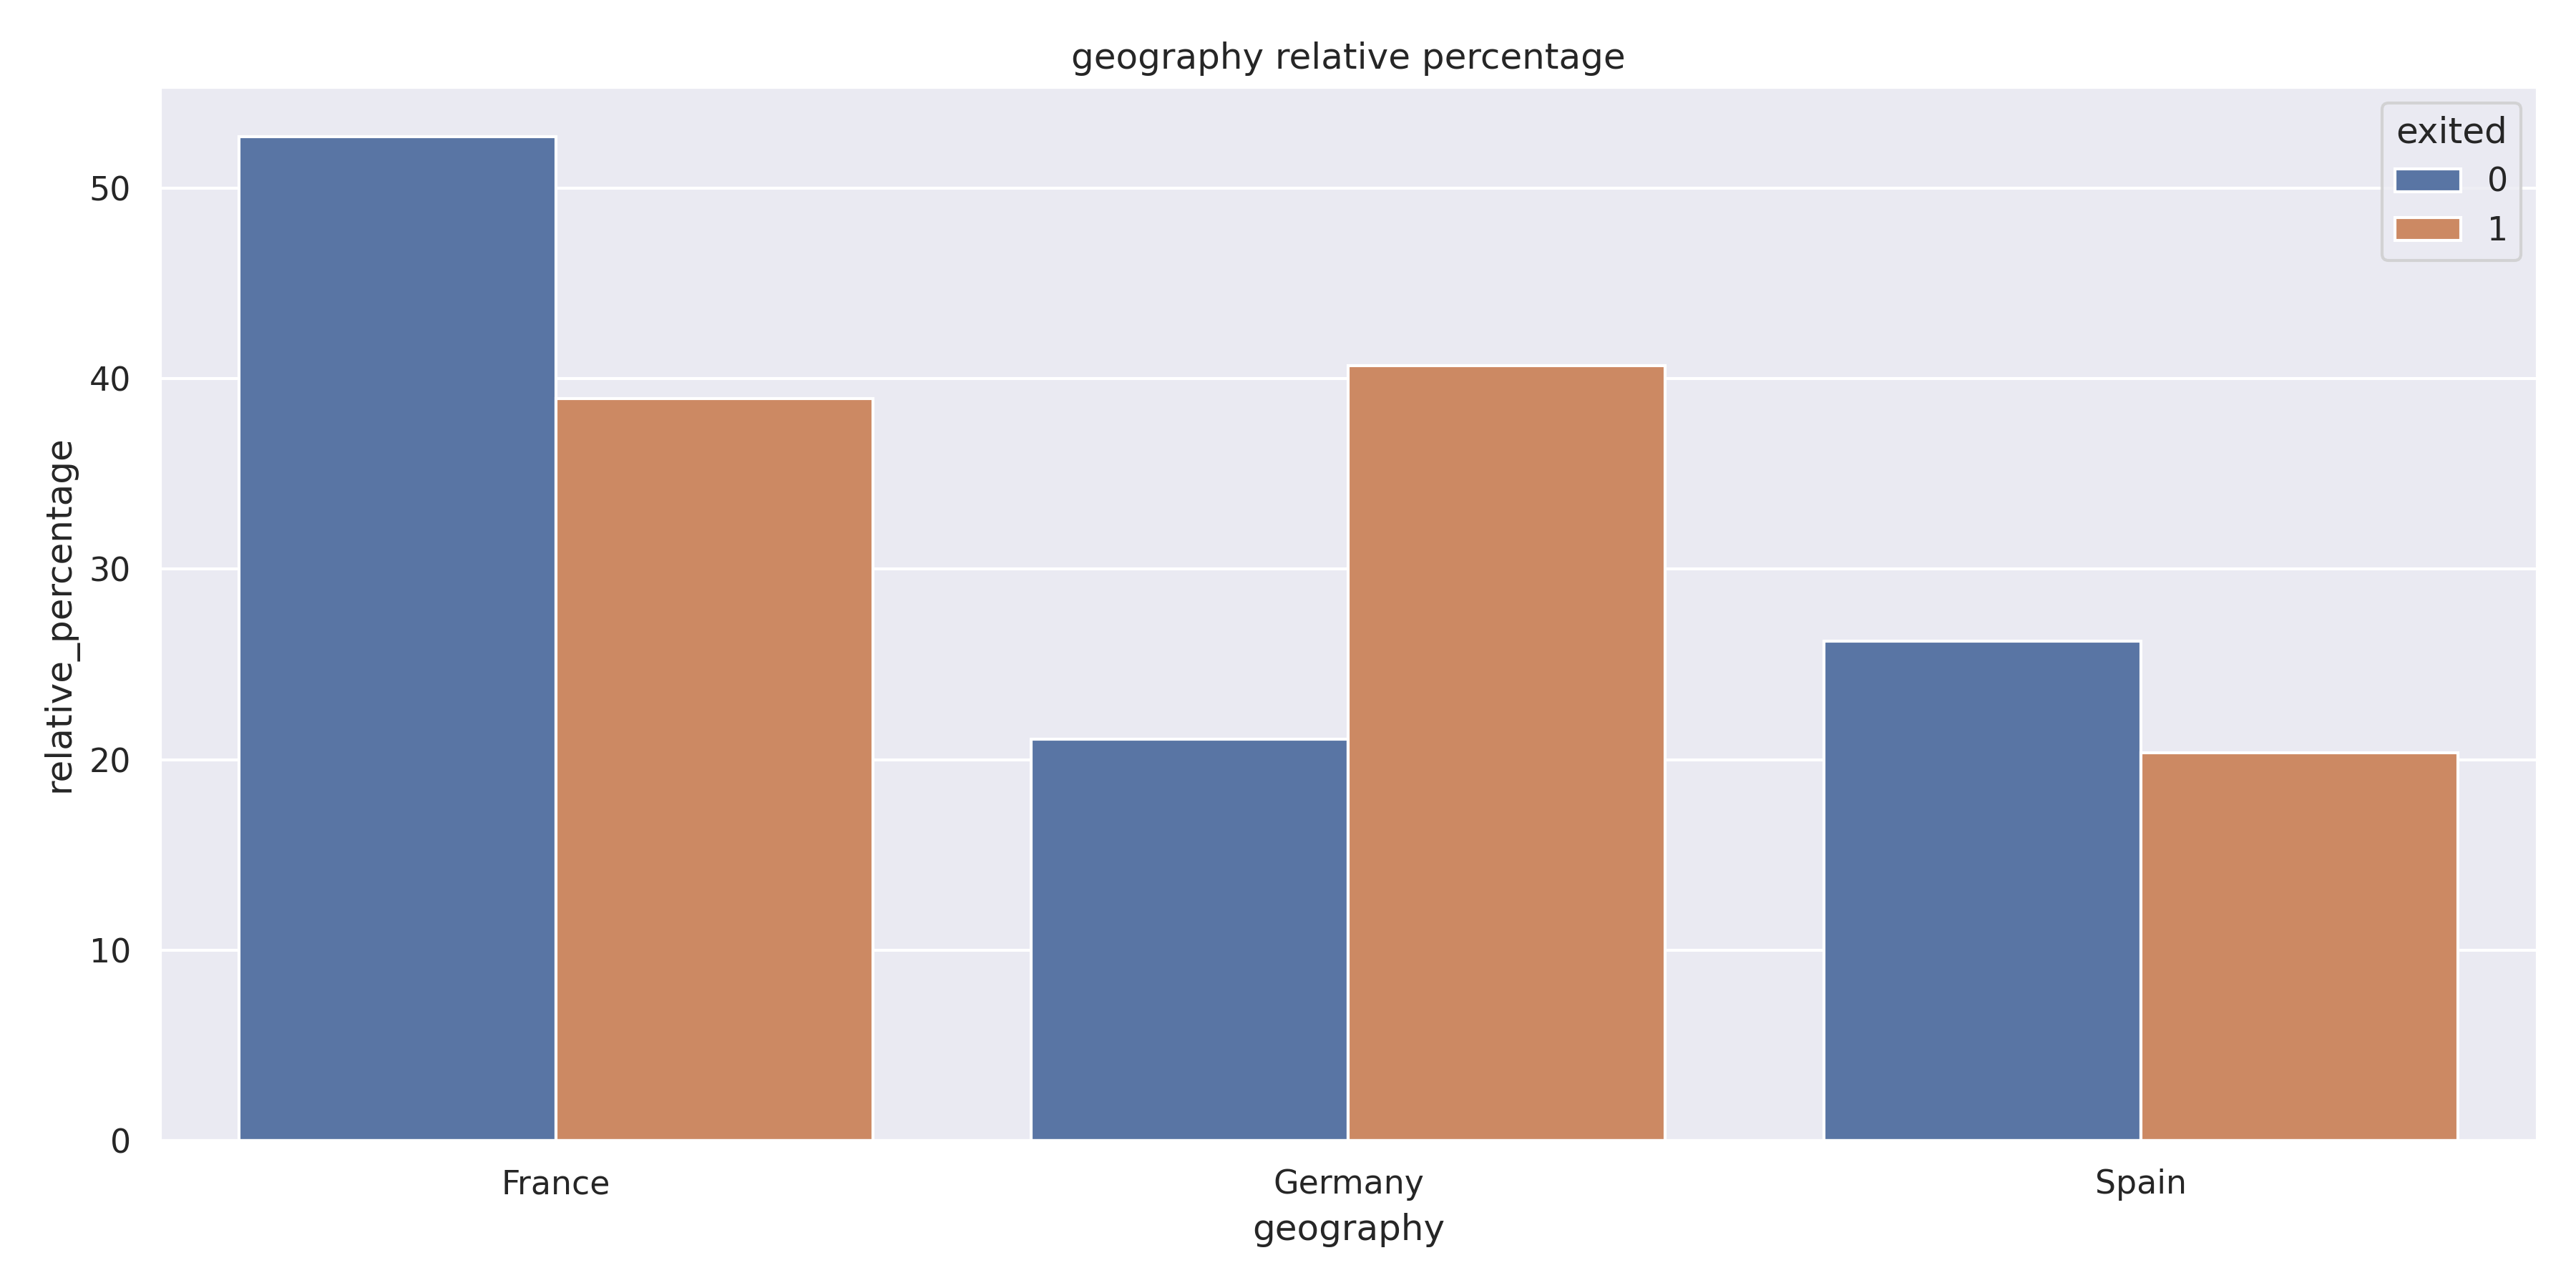 04_geography_relative_percentage.png